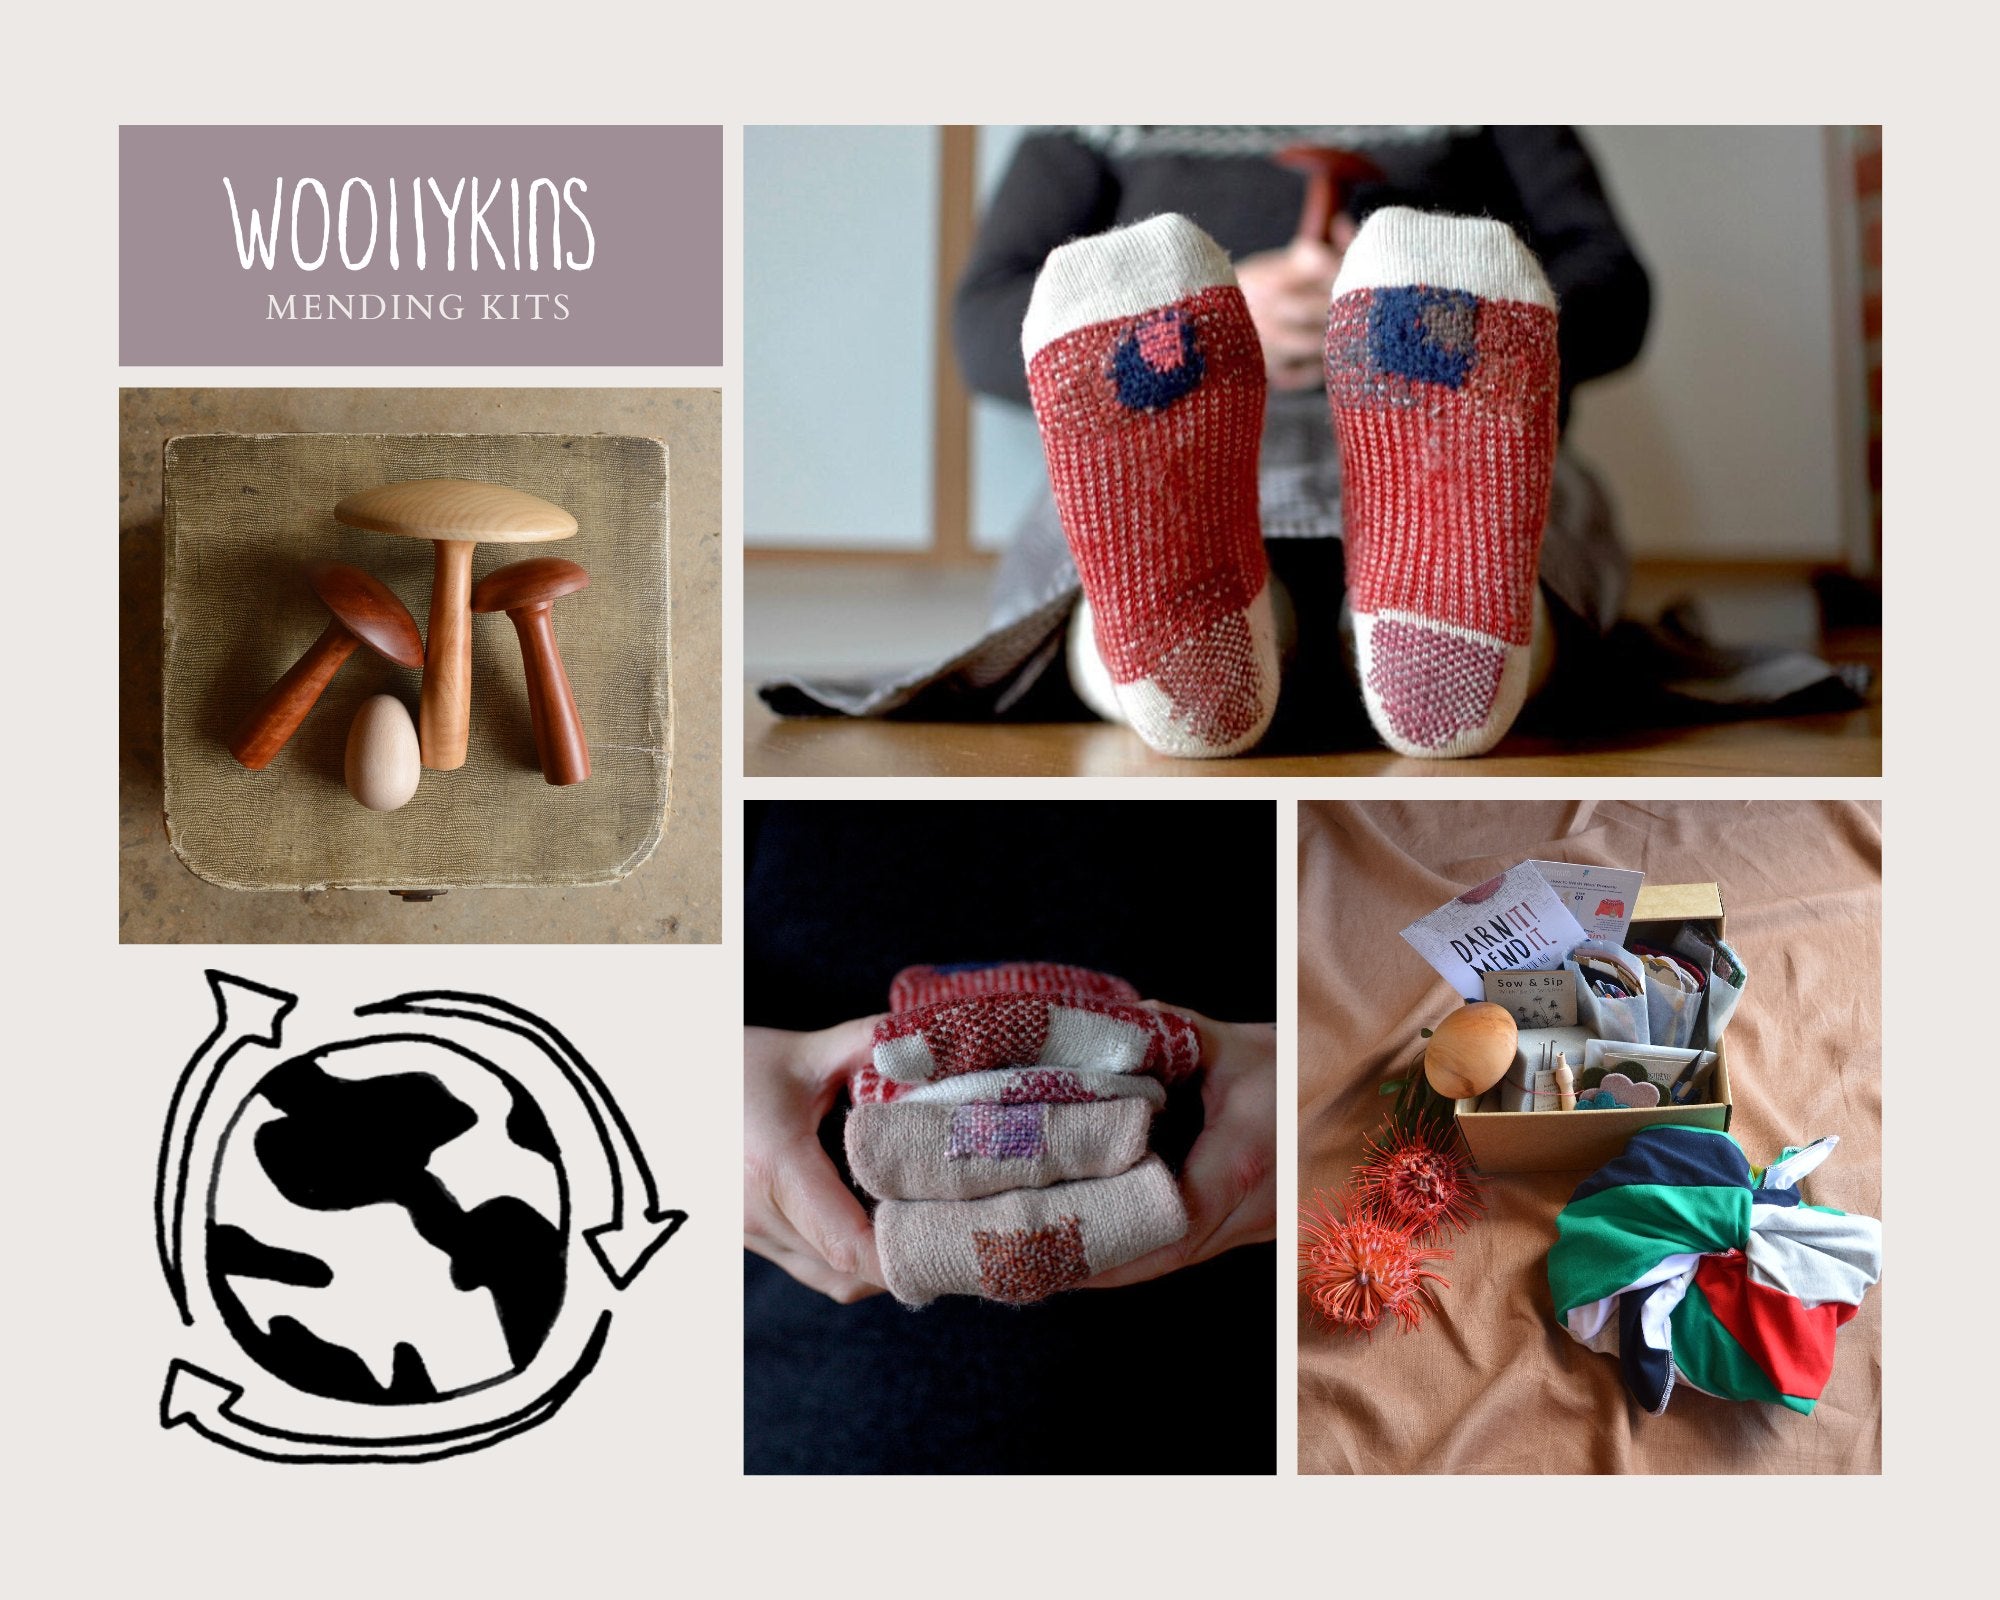 Mending Matters more than ever! Repair your textiles for life with a Woollykins Mending Kit